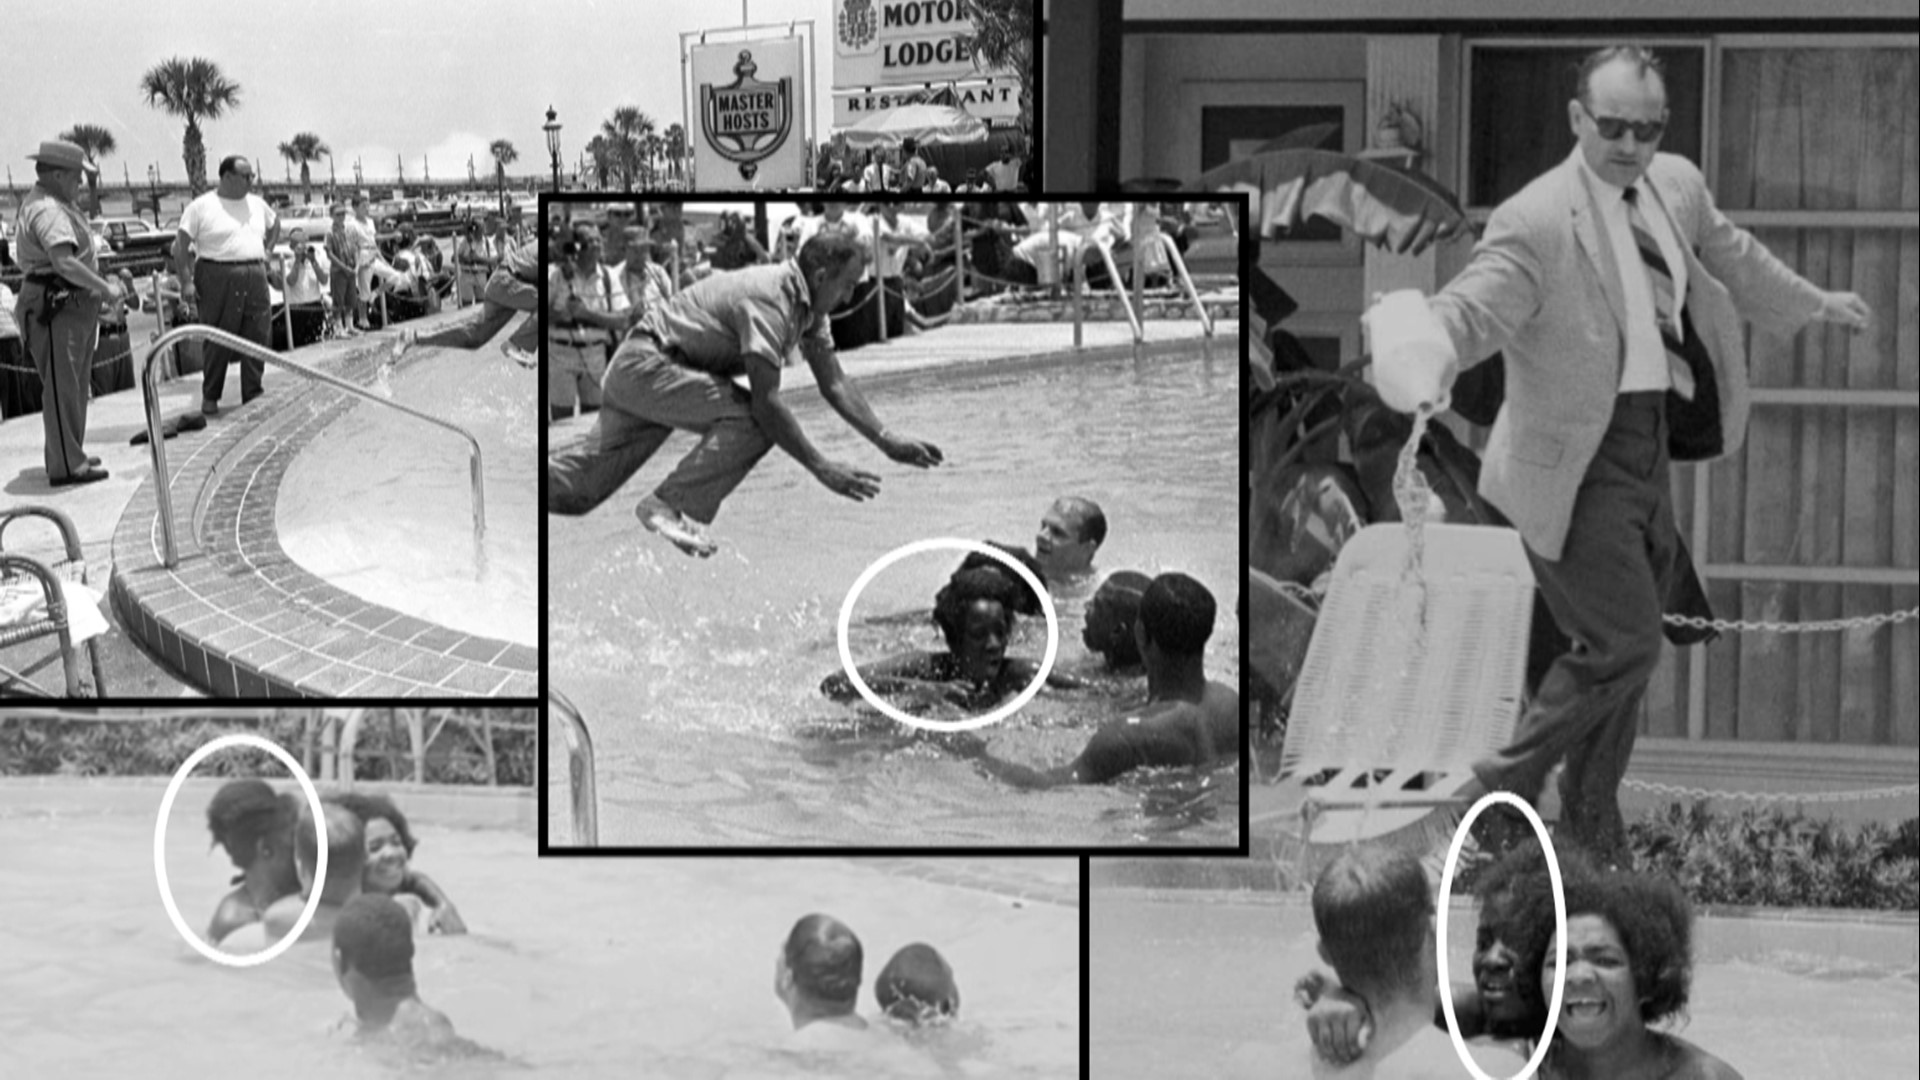 The photograph of the hotel’s owner throwing acid at protesters in the pool put St. Augustine in the national spotlight during the Civil Rights movement.